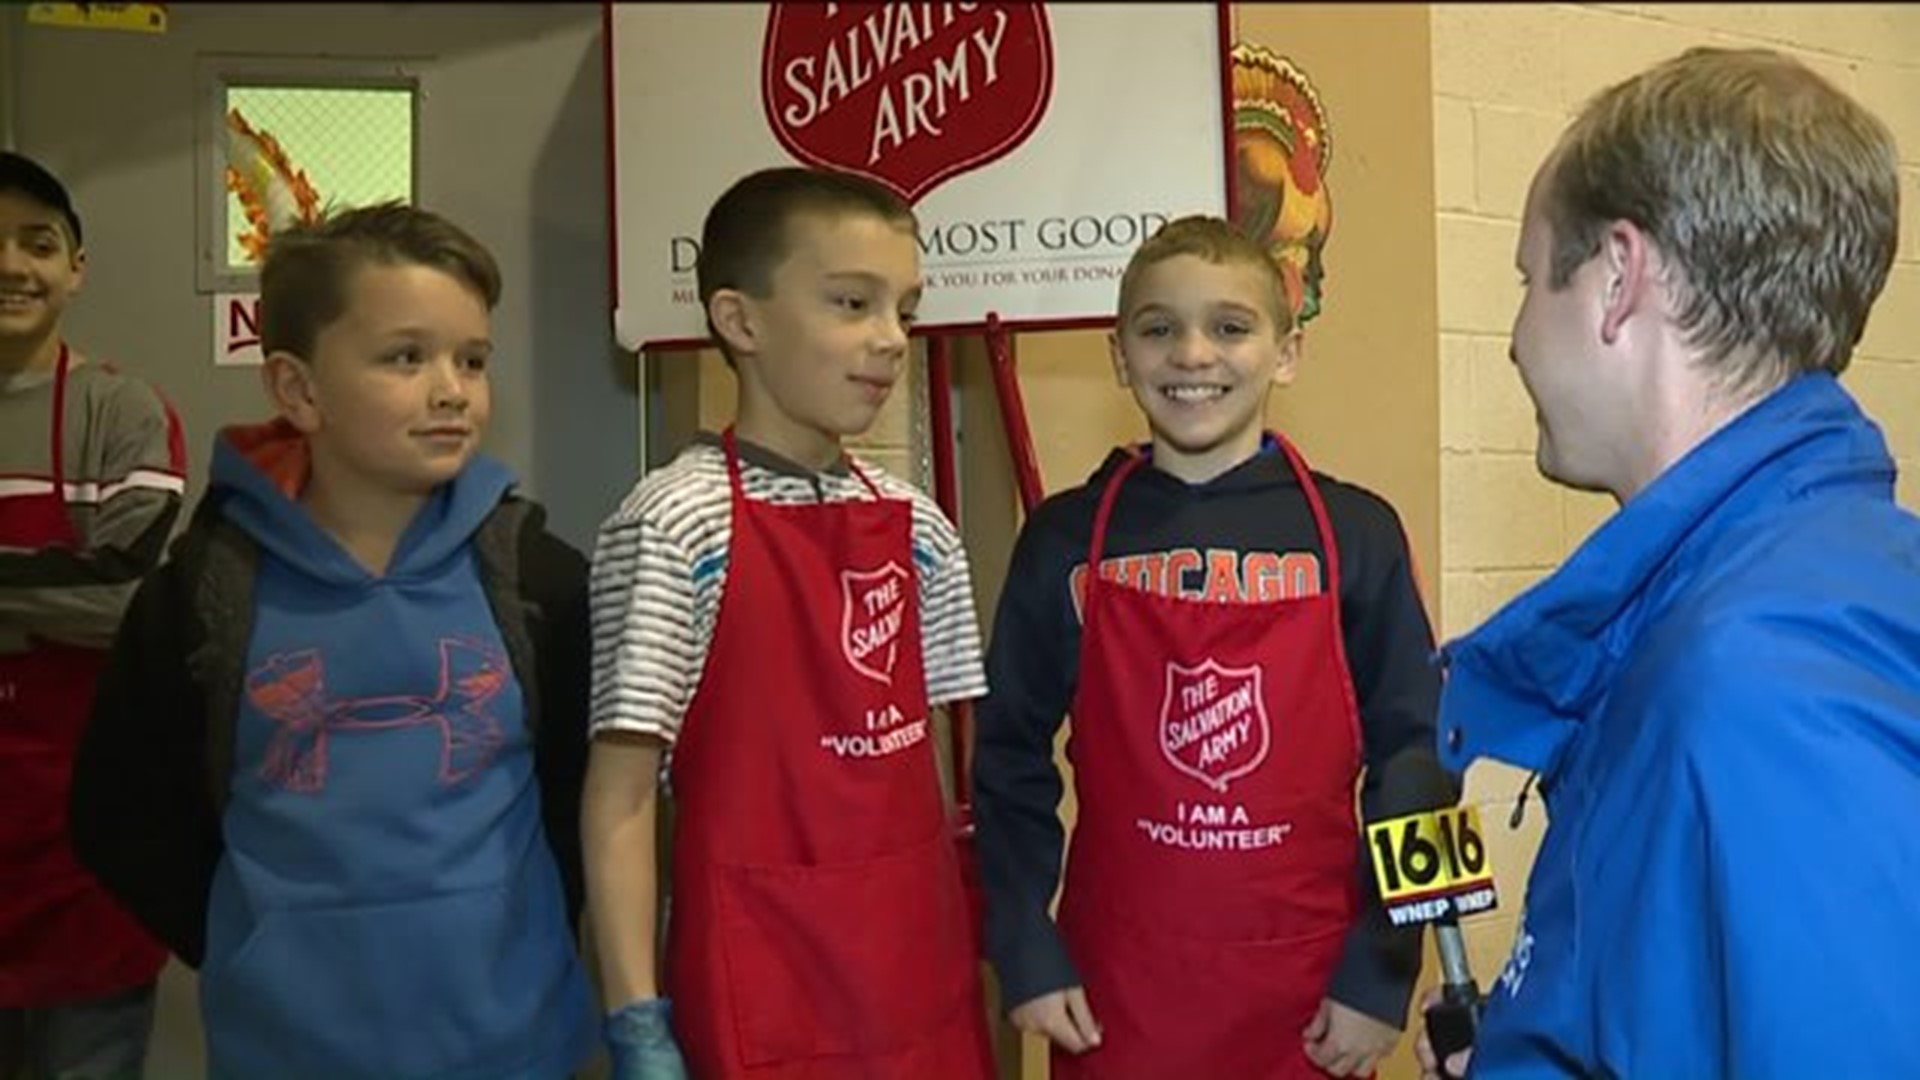 Starting a New Tradition to Help Others in Tamaqua